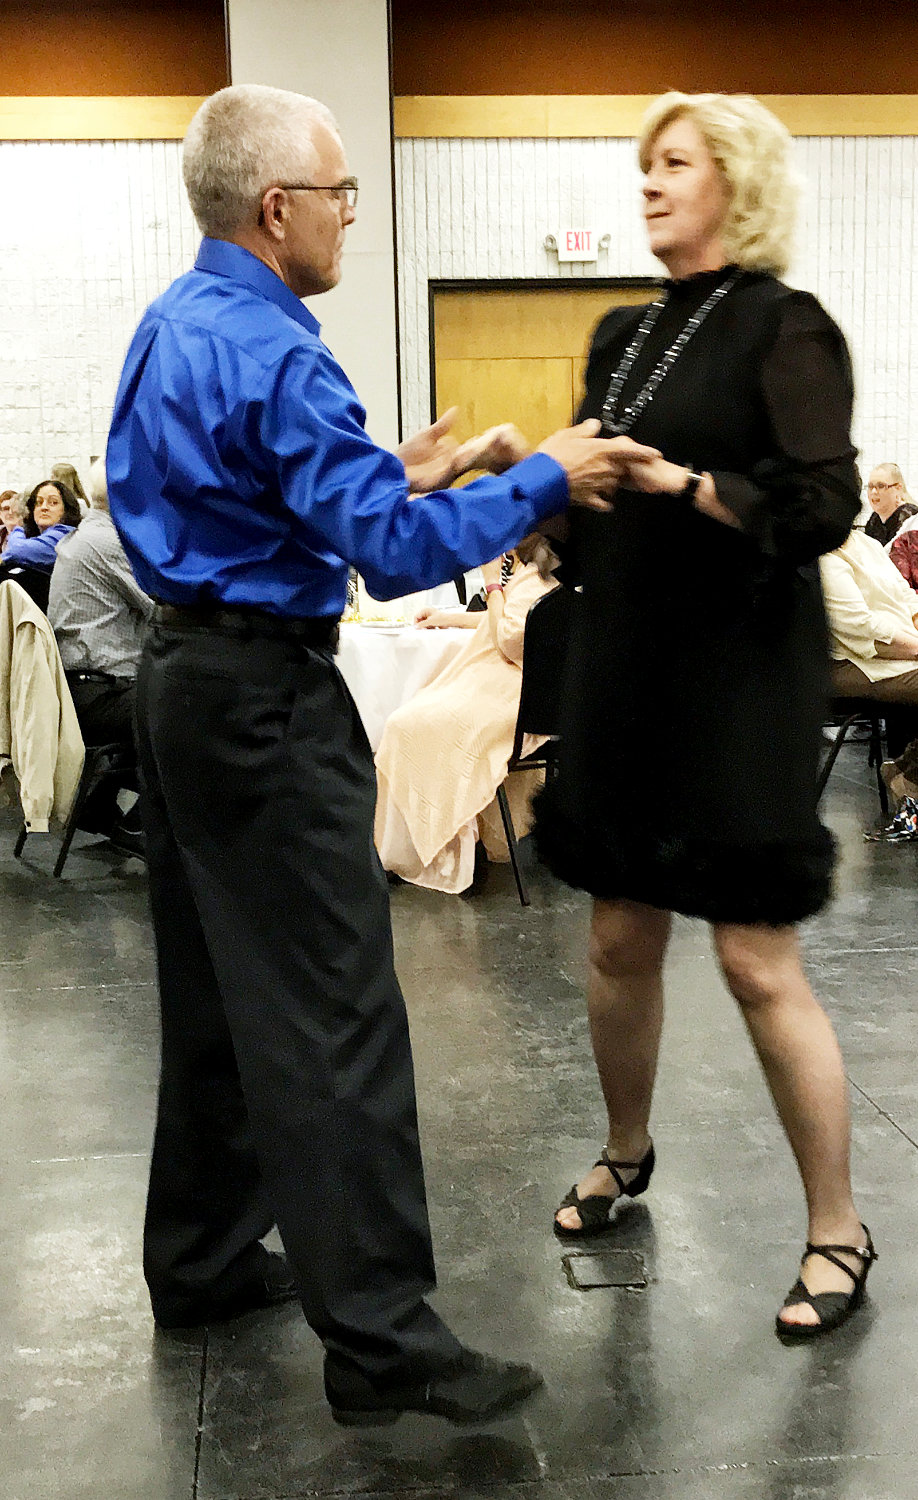 Joel and Becky Moore participated in the show as ballroom dancer contestants.